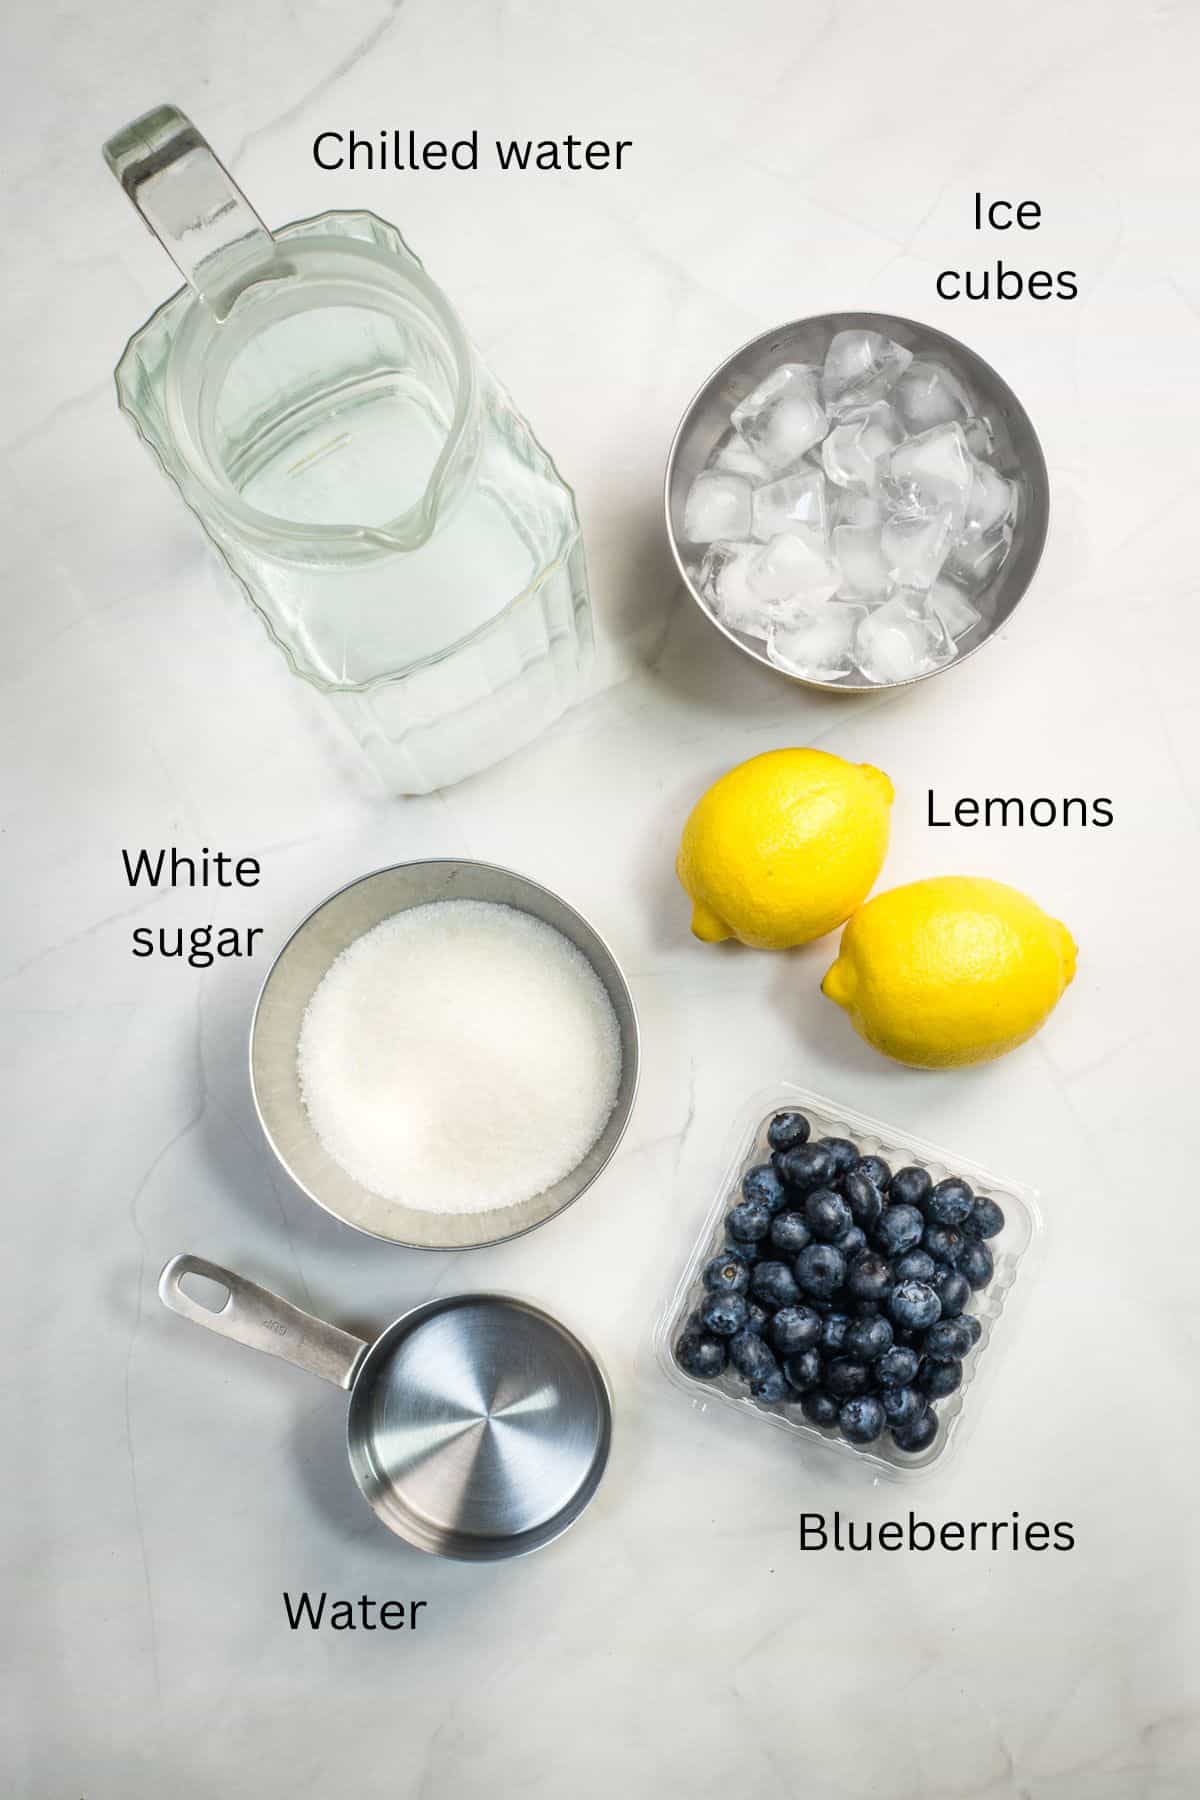 Ice cubes, sugar, water, lemons and blueberries against a marble background.